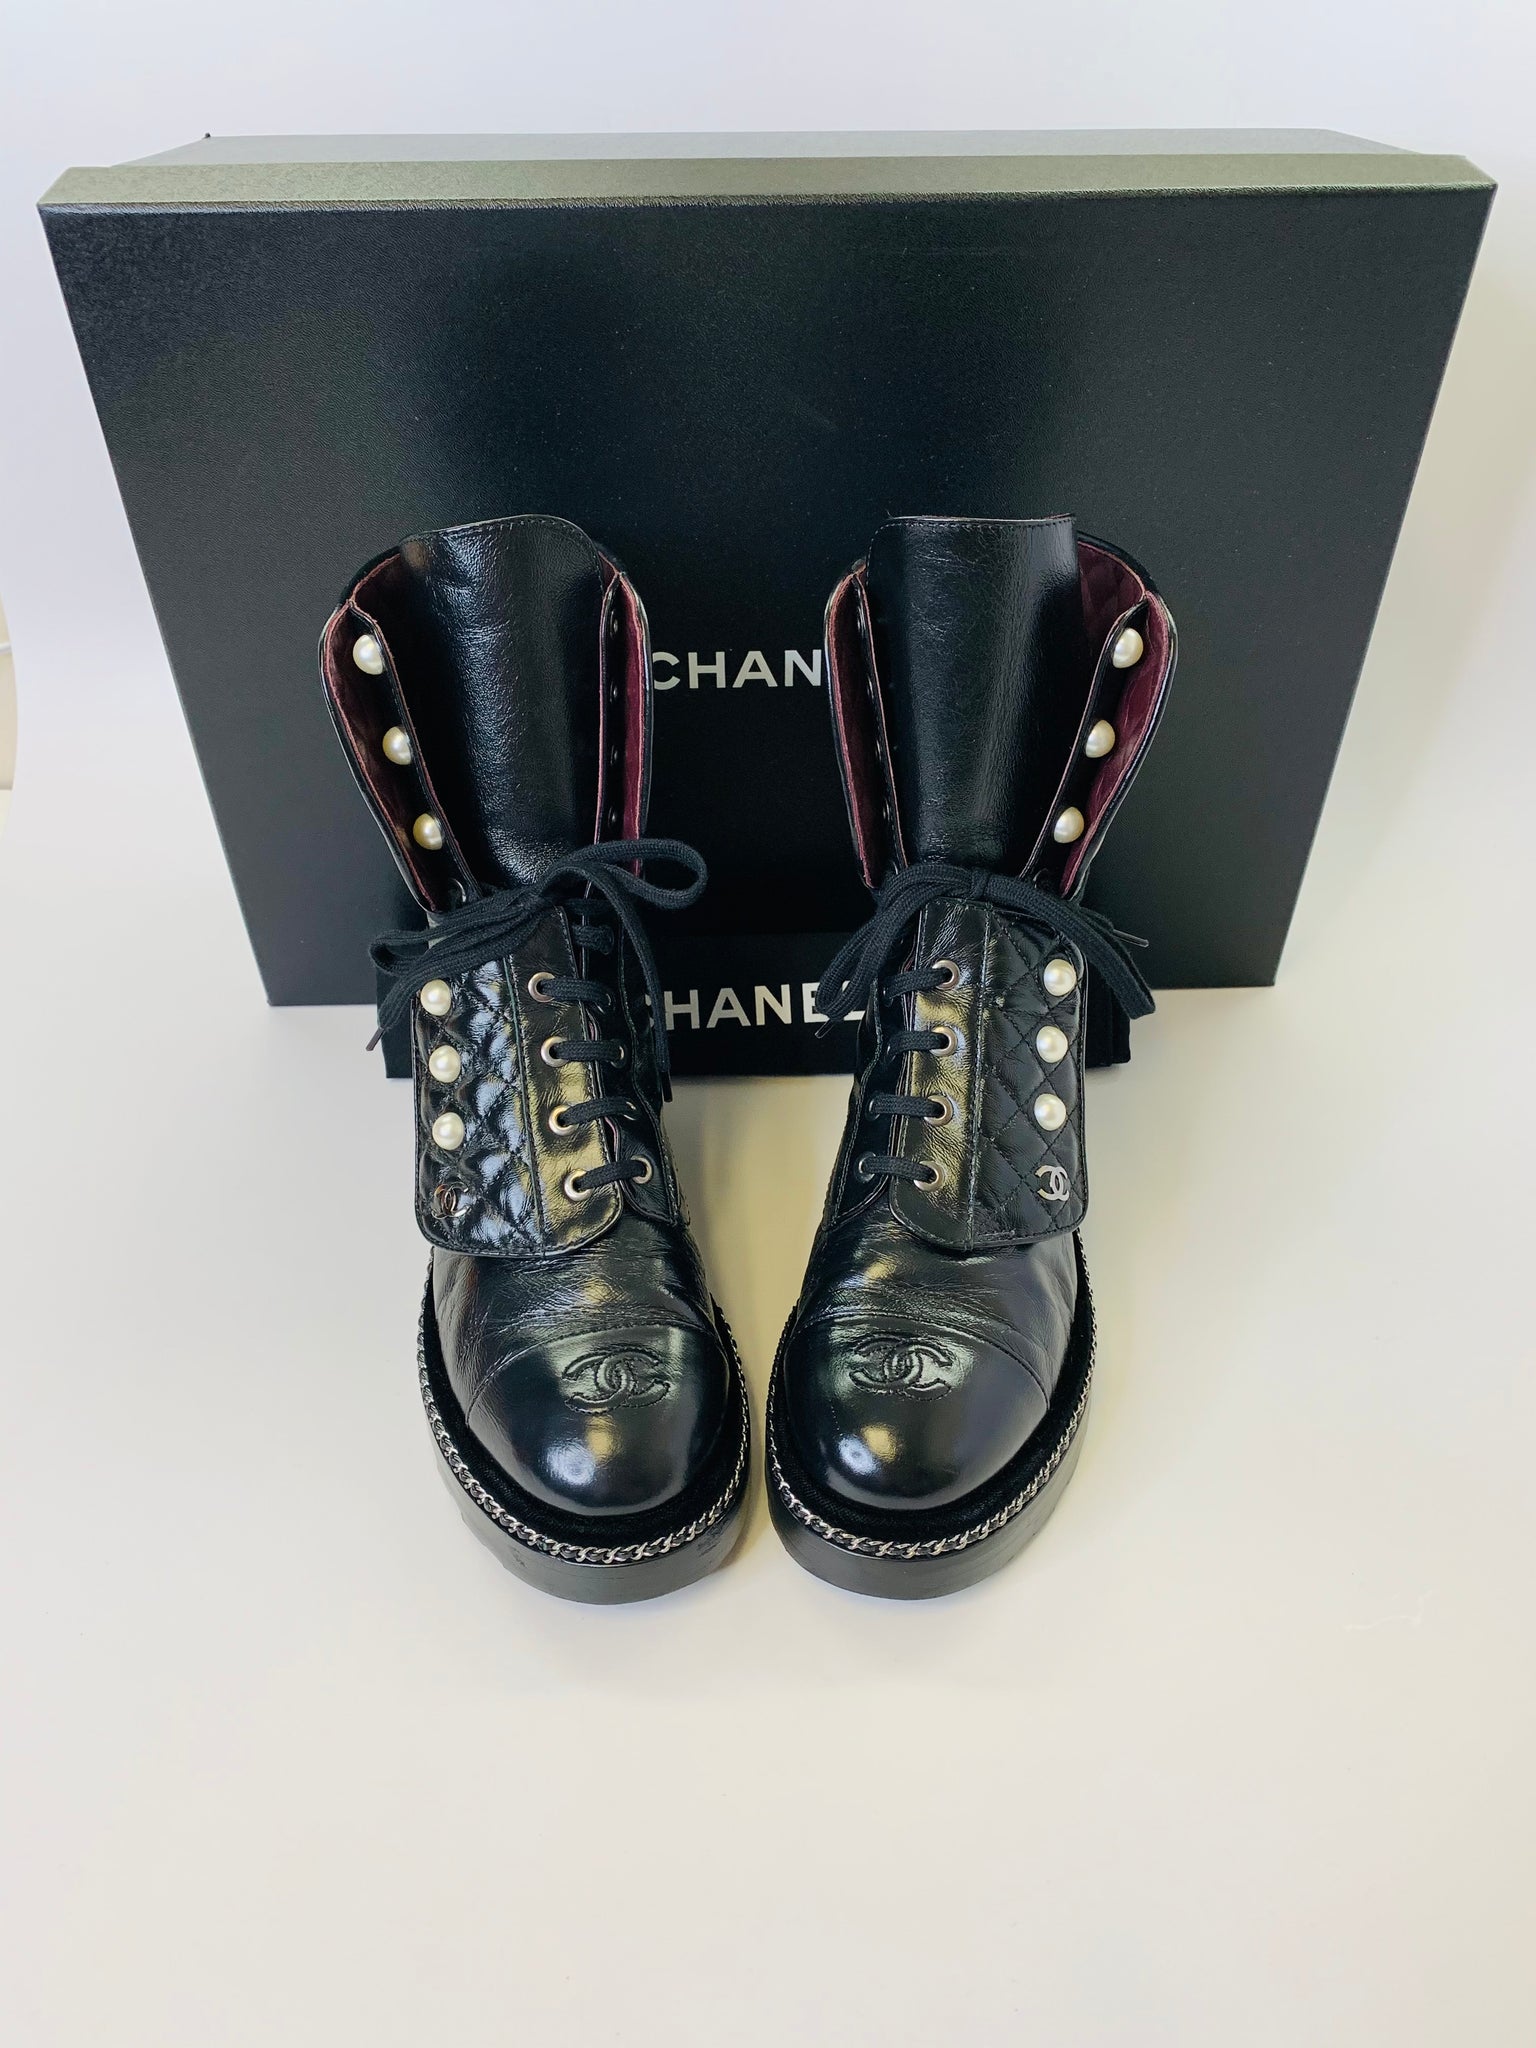 Chanel Black Leather Ankle Boots with Pearl Chain Detail  41  40  I MISS  YOU VINTAGE